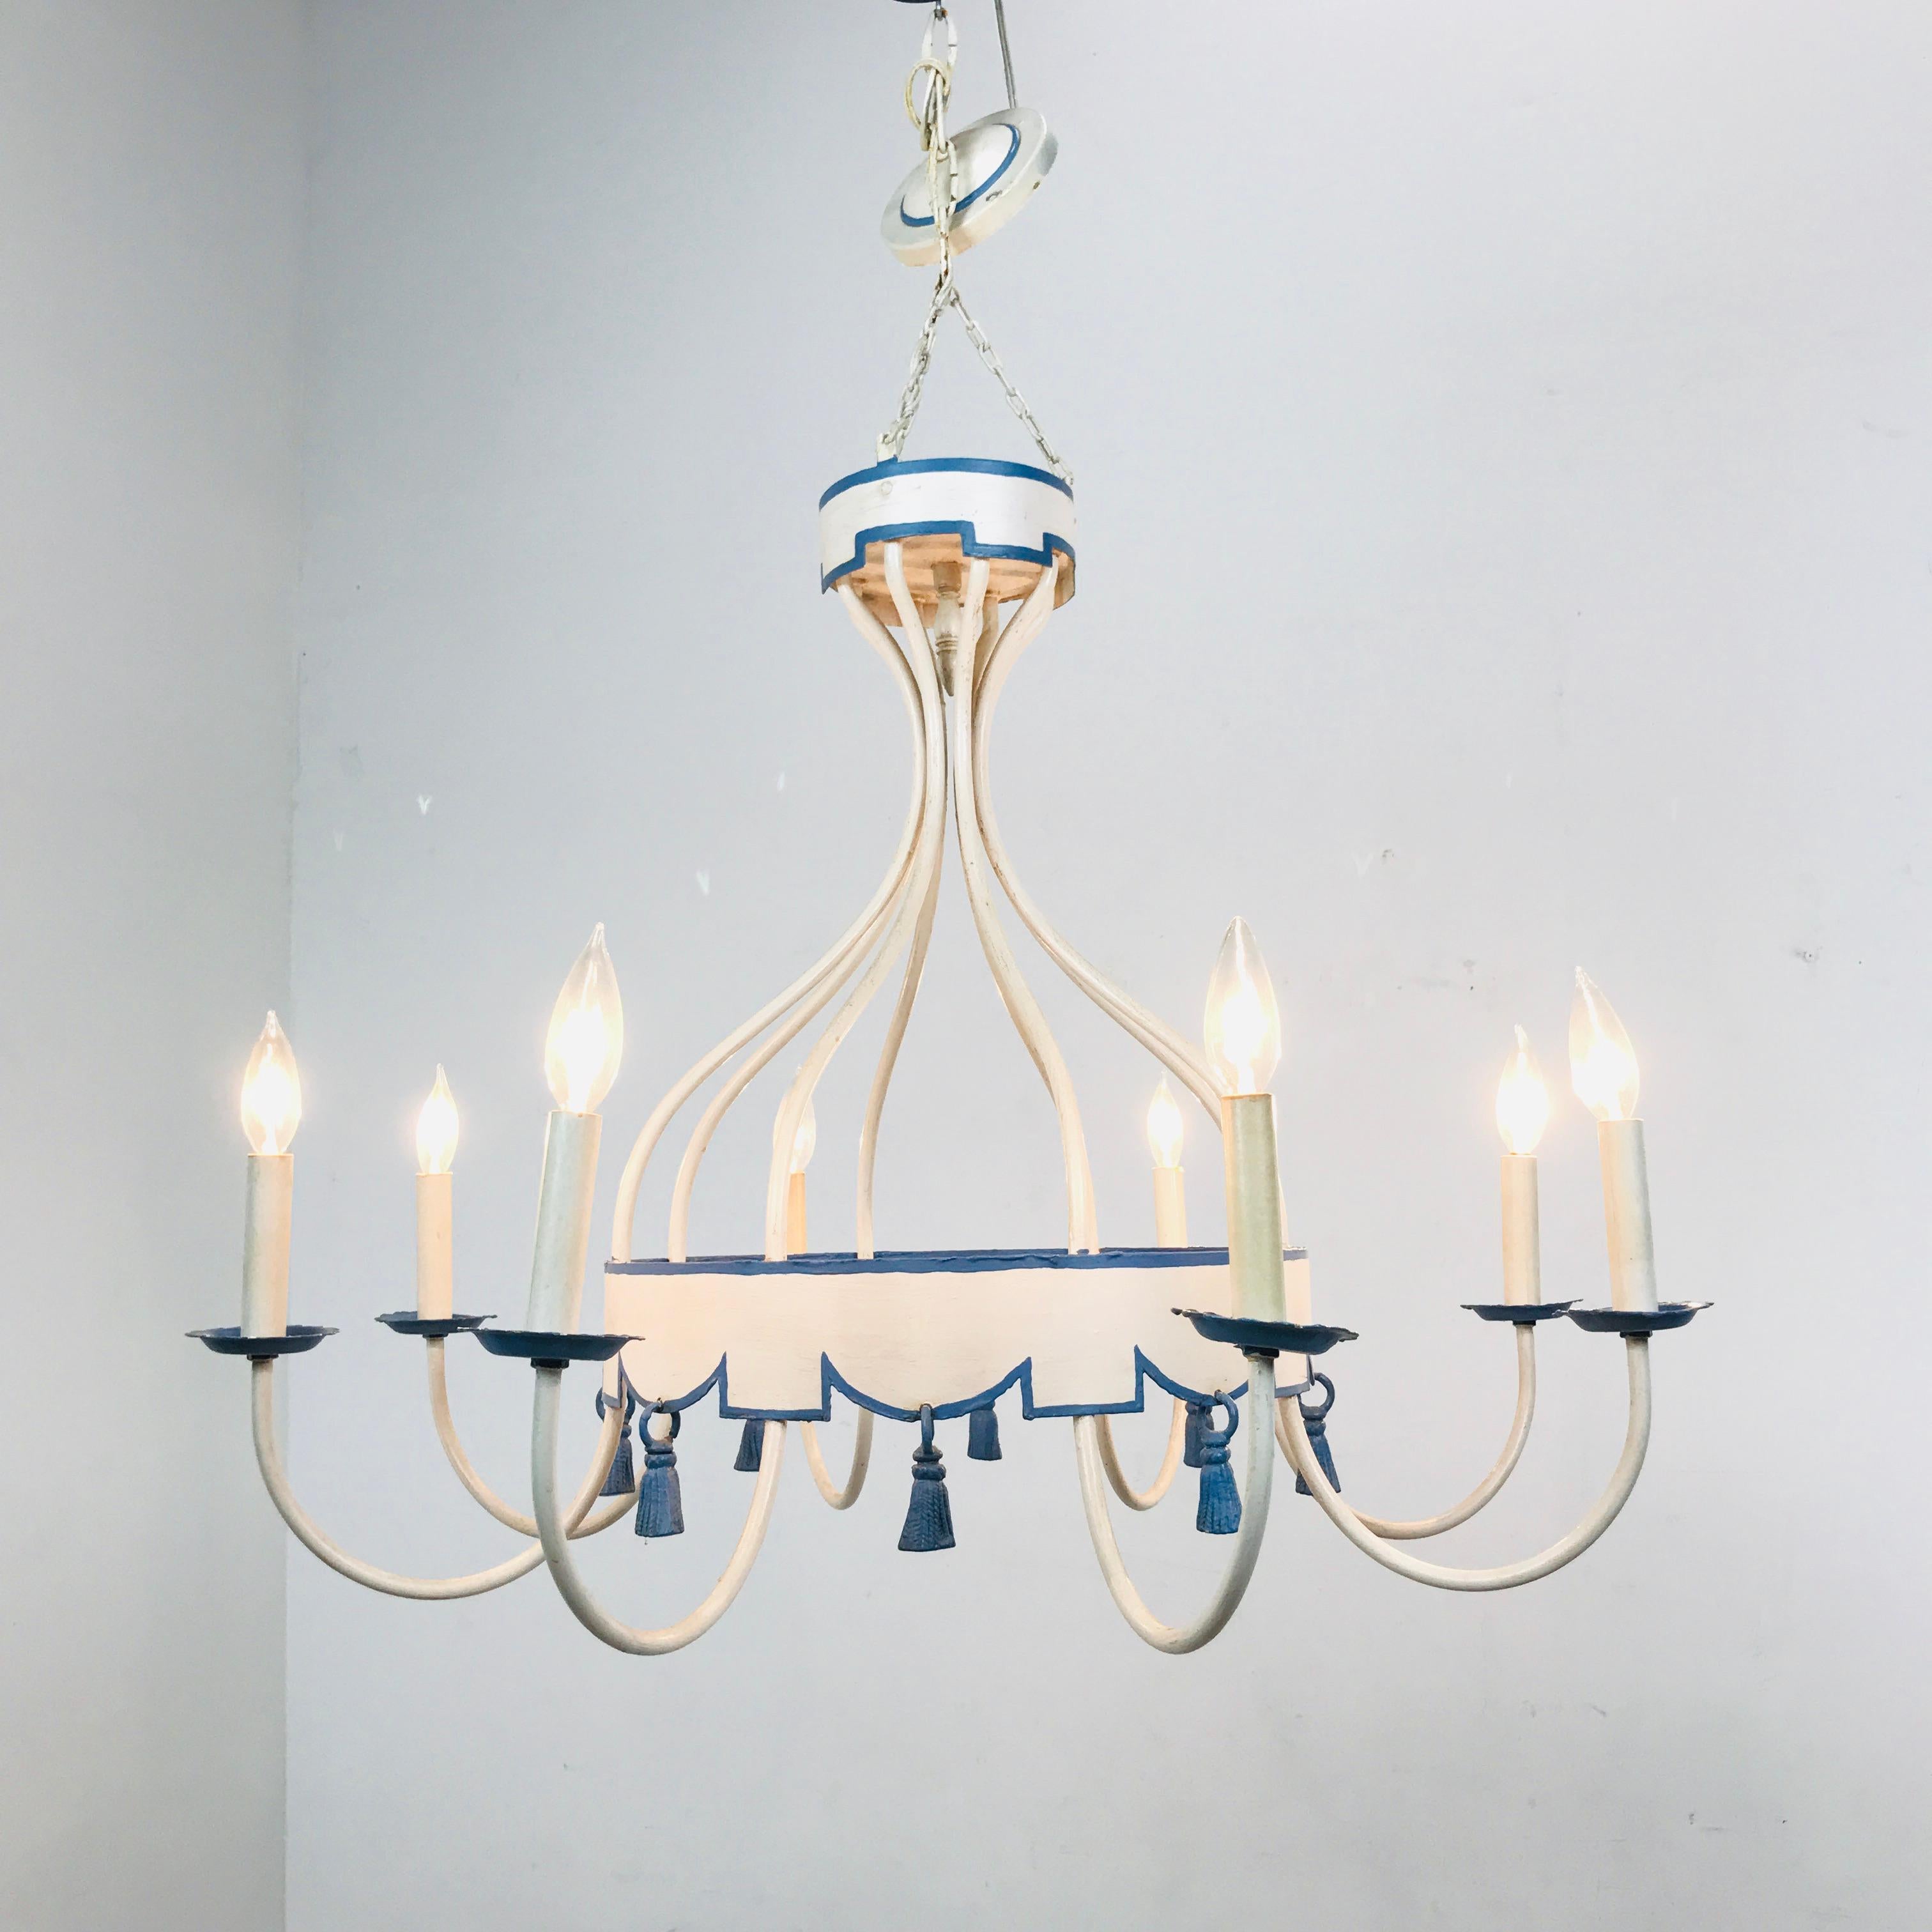 Late 20th Century Blue and White Italian Tole Tassel Chandelier